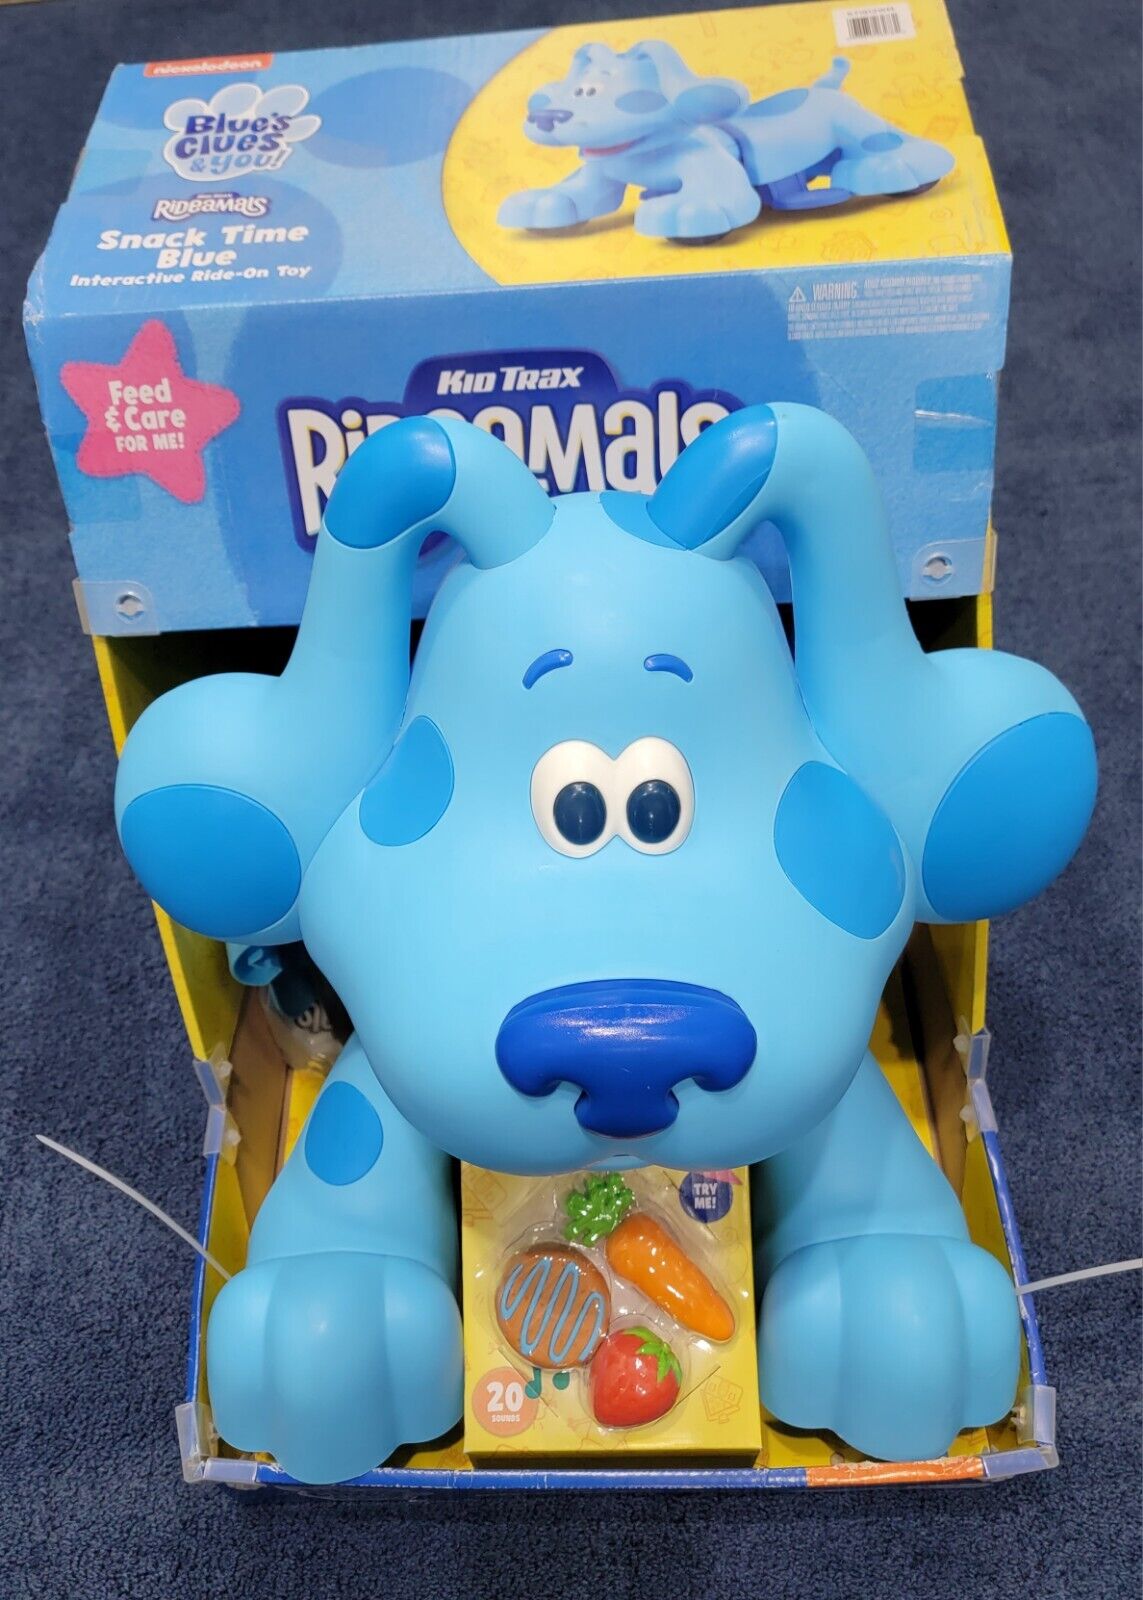 Blue\'s Clues Rideamals Snack Time Interactive Ride-On Toy by Kid Trax BRAND NEW